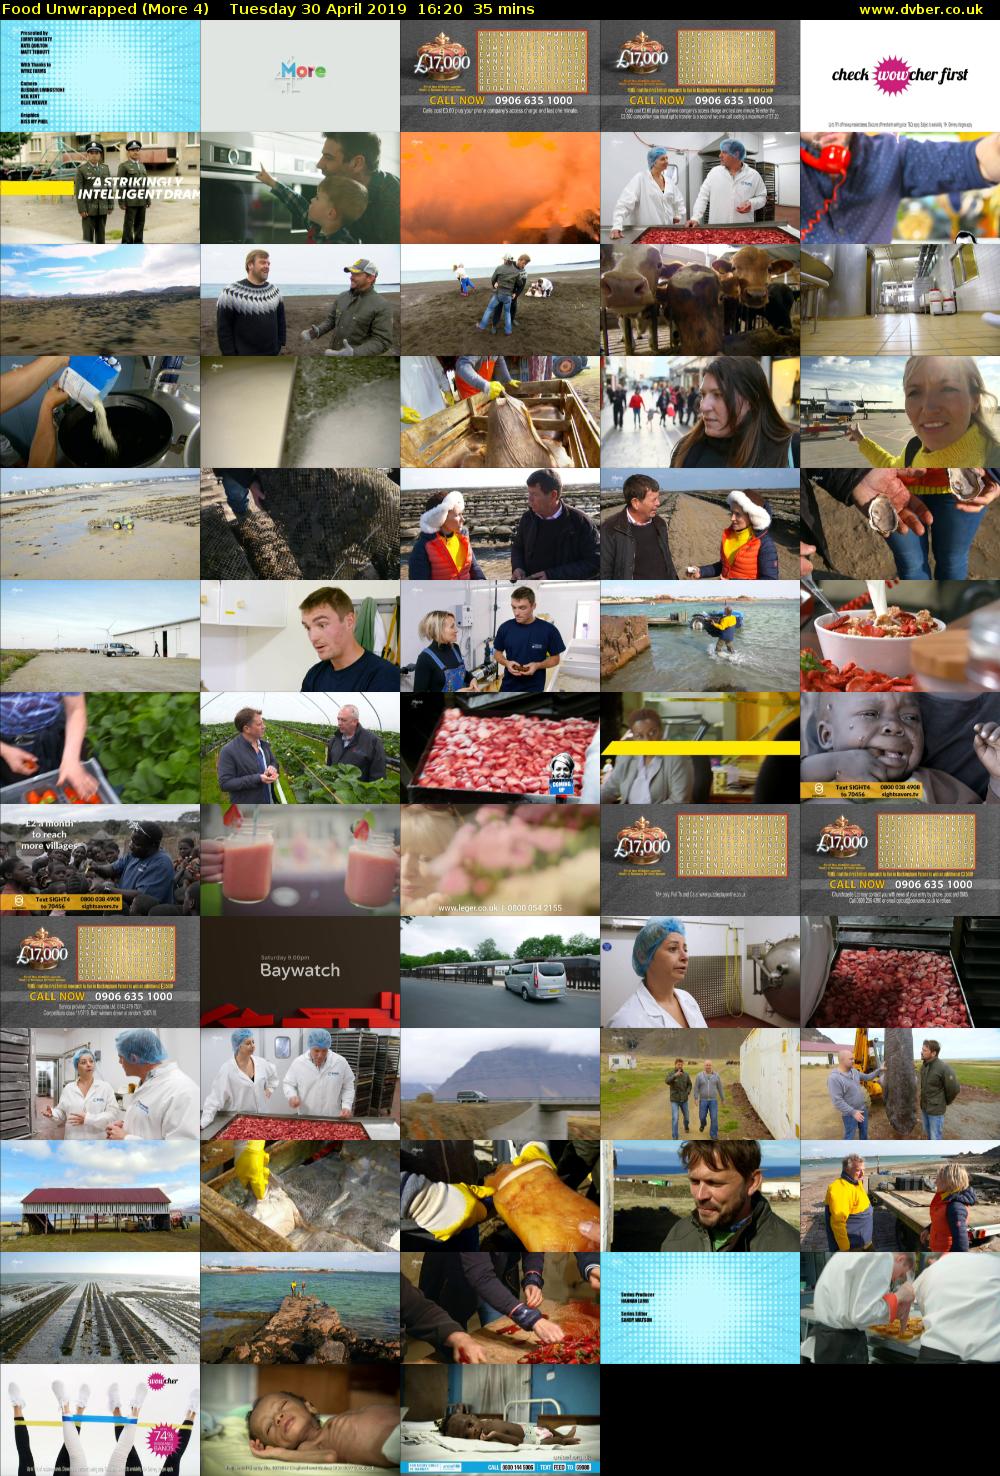 Food Unwrapped (More 4) Tuesday 30 April 2019 16:20 - 16:55